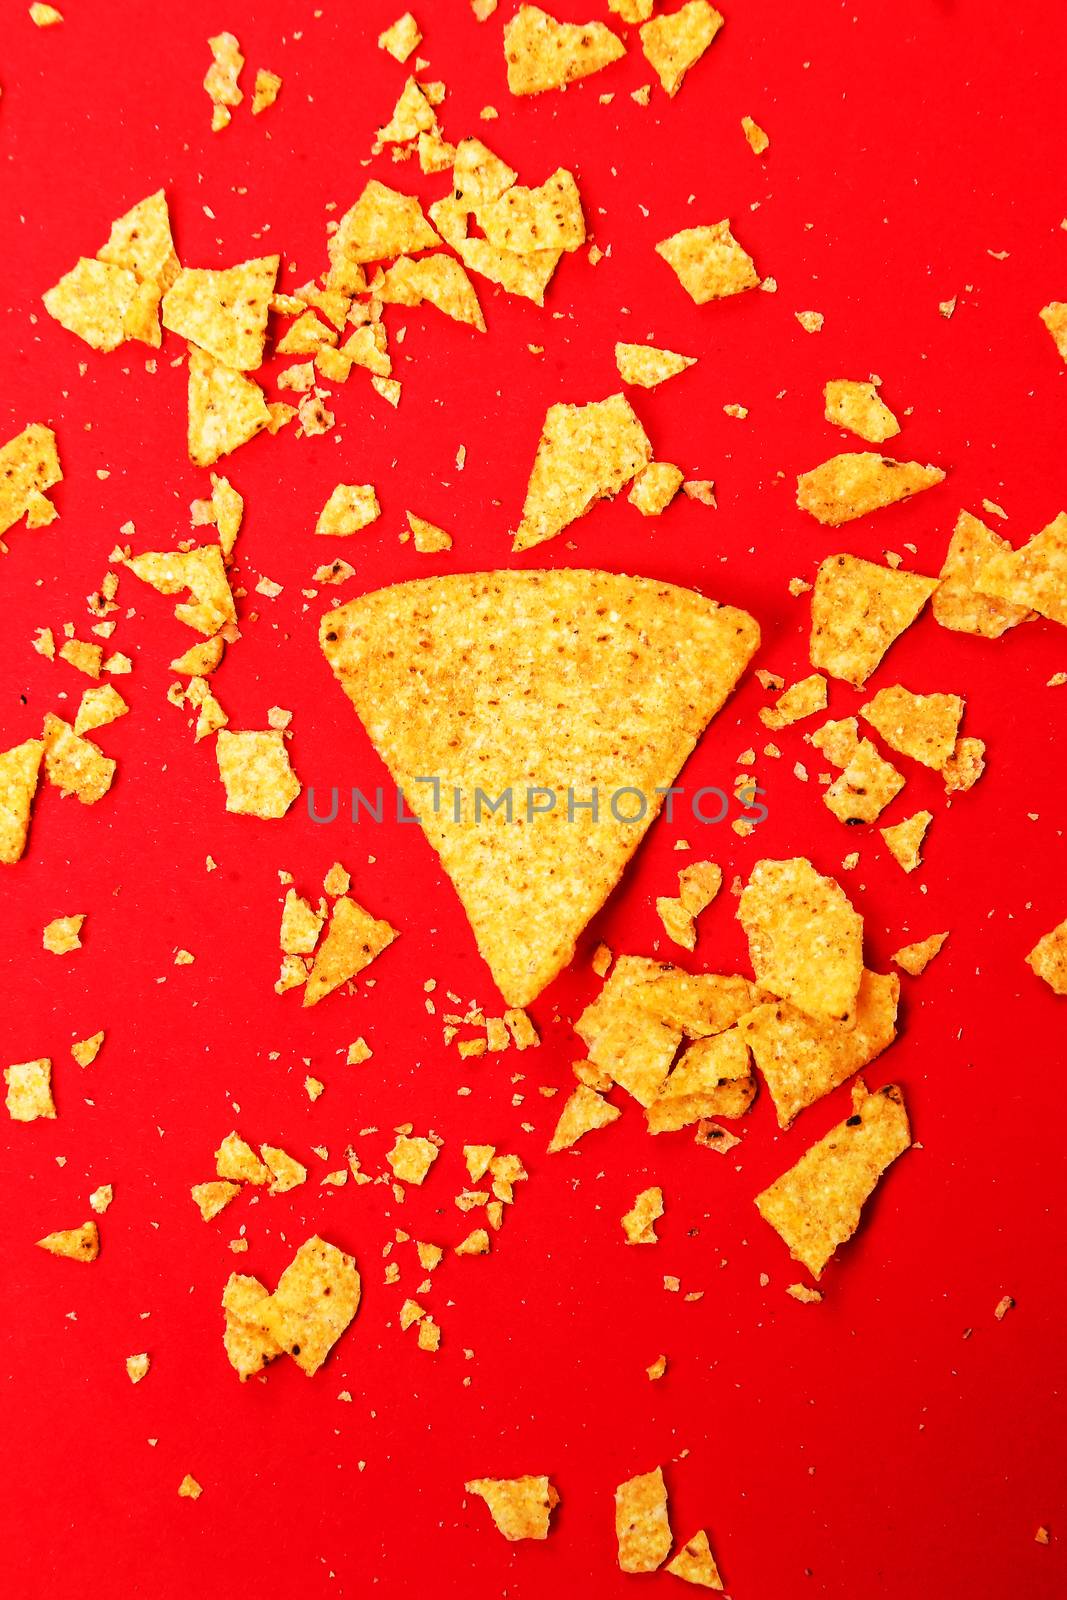 Potato chips on a red background